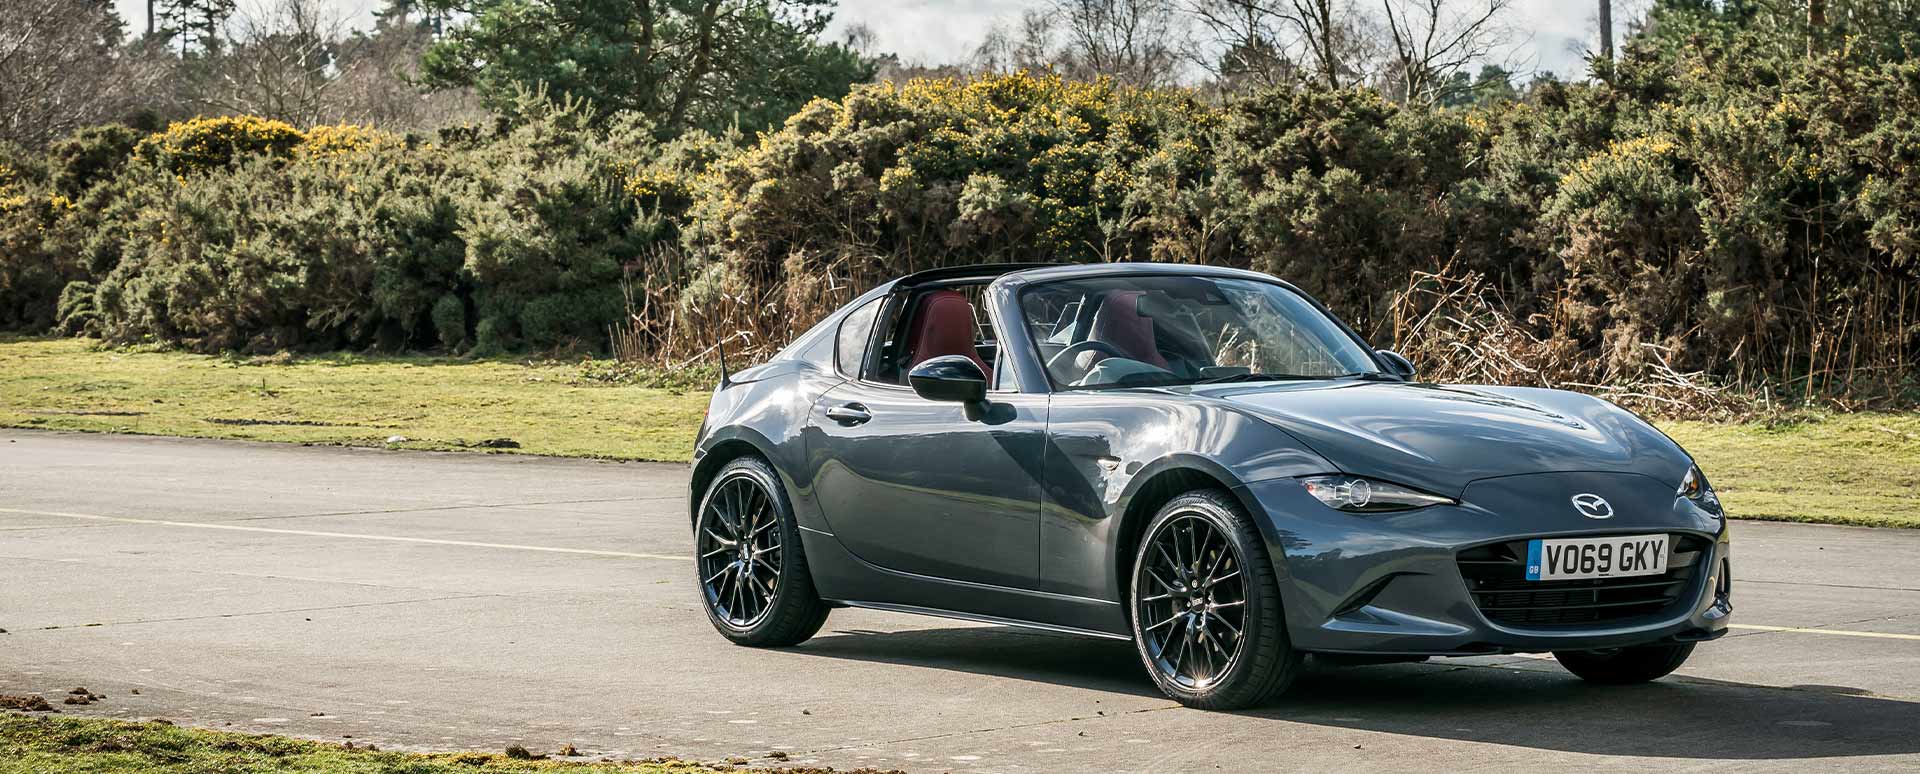 Best Used Convertibles Under £15,000